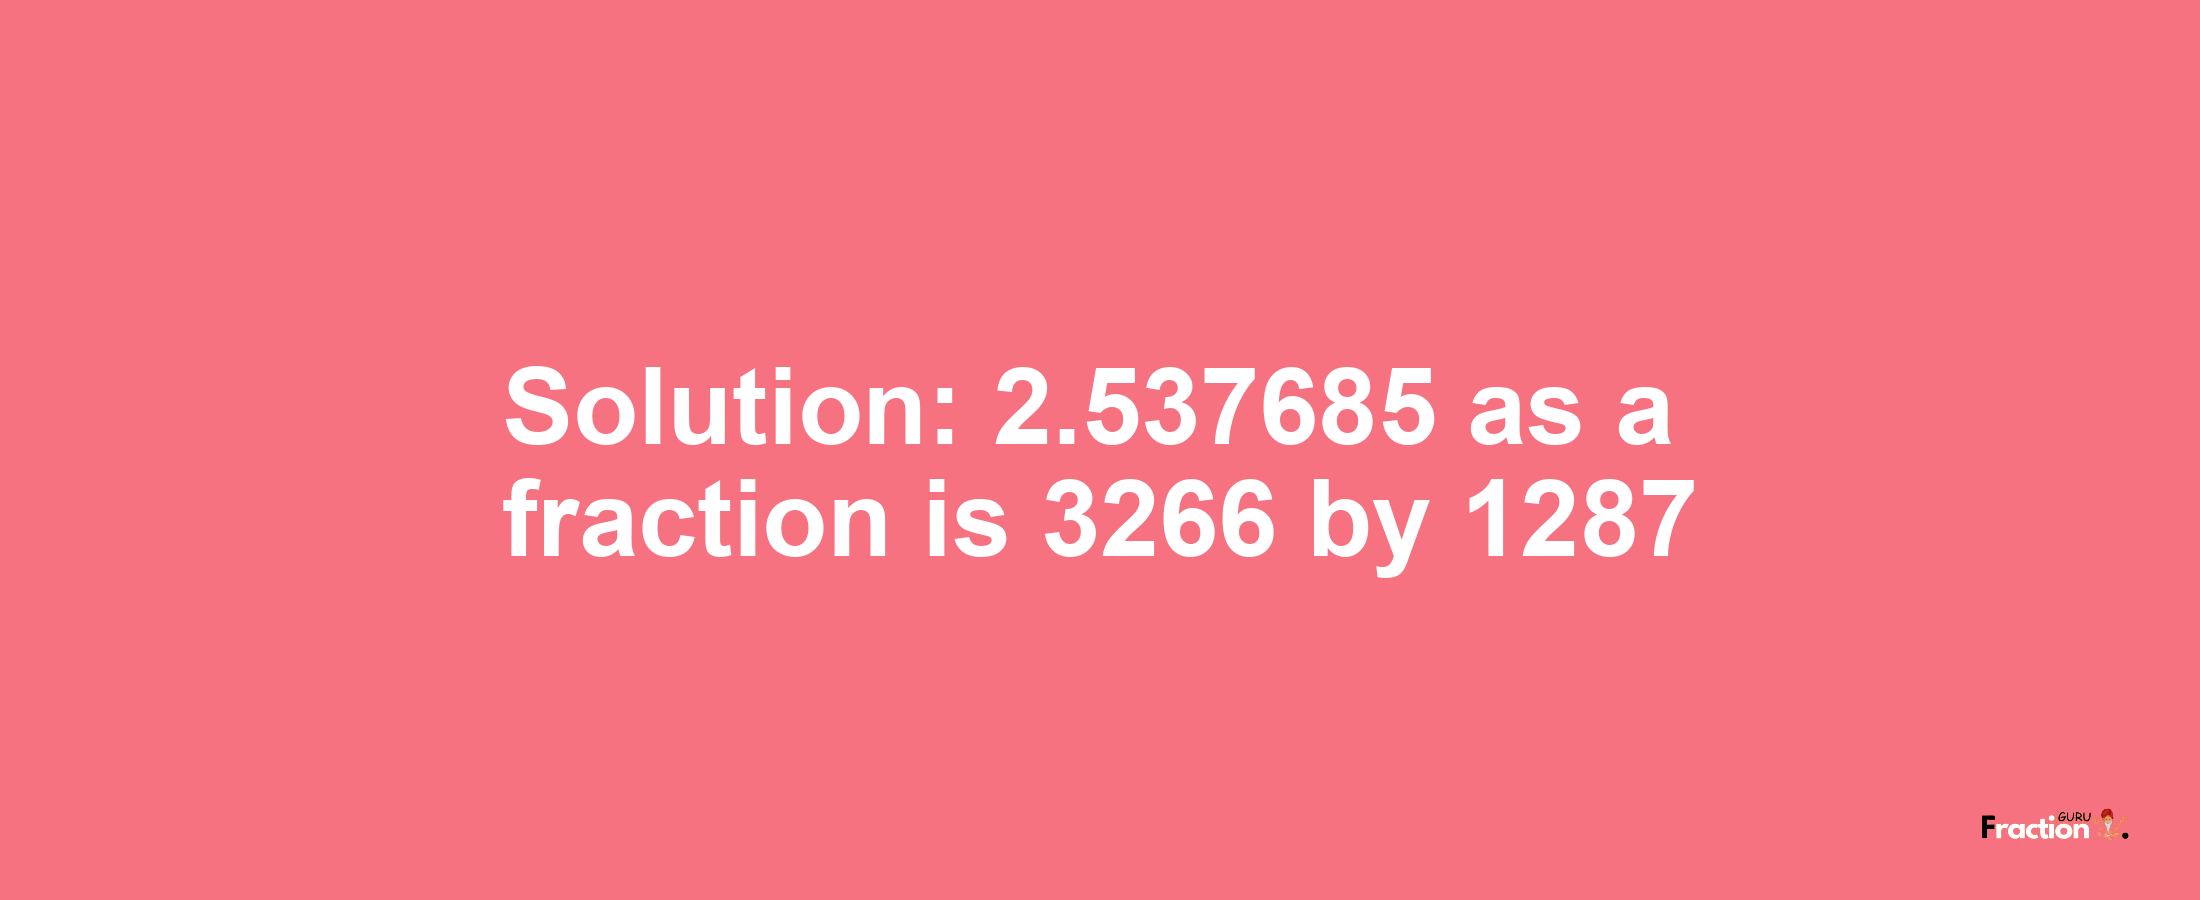 Solution:2.537685 as a fraction is 3266/1287